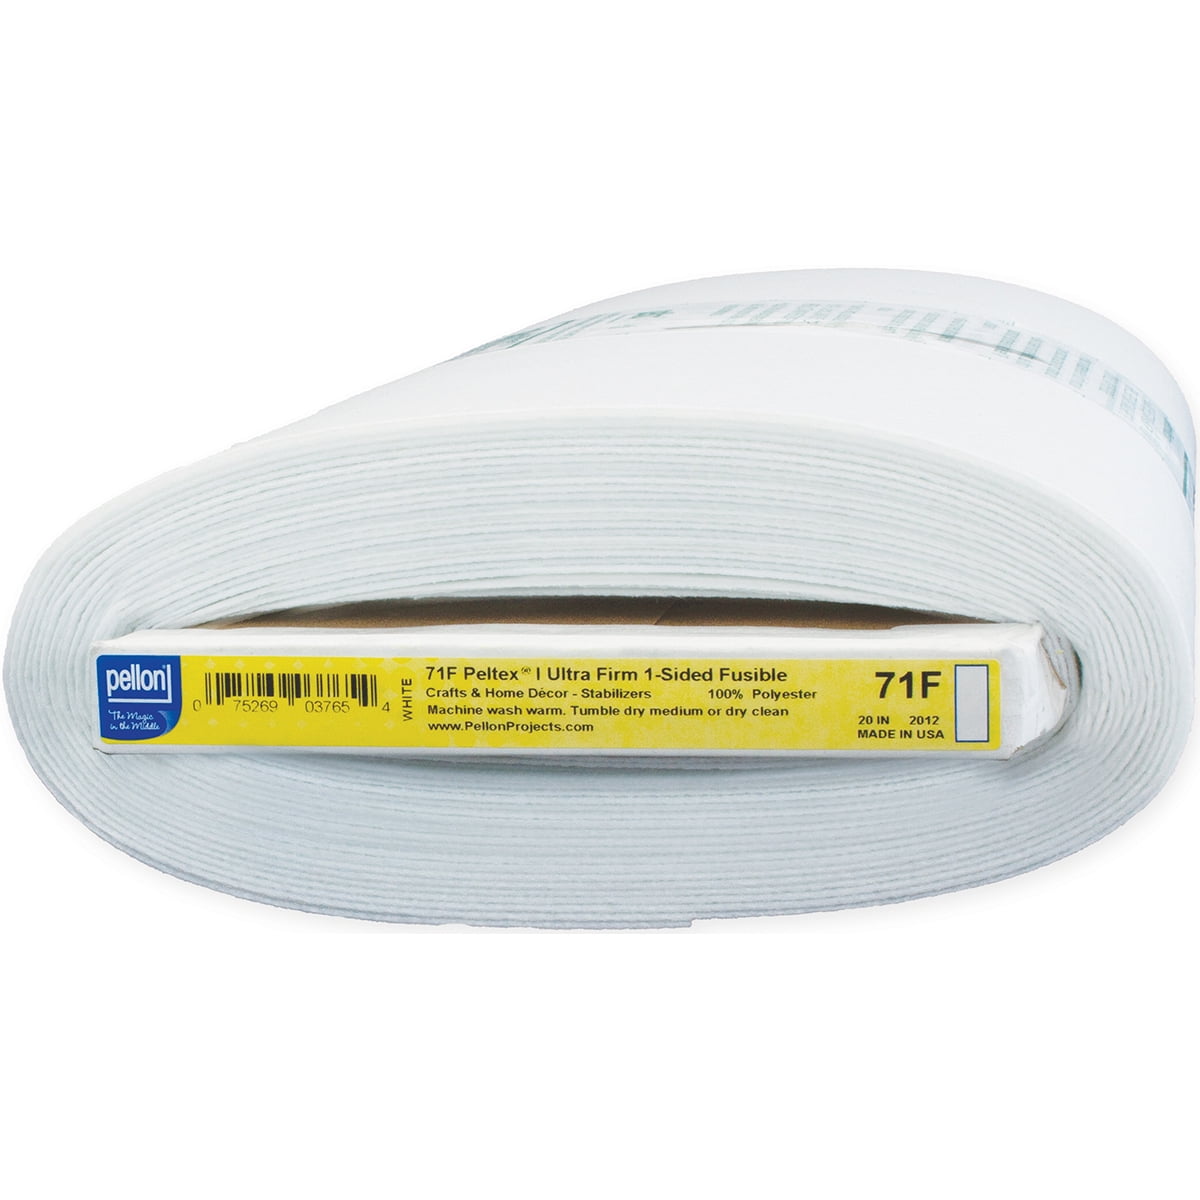 Pellon 911FF 20 inch x 40 Yards Fusible Featherweight Interfacing - White  for sale online